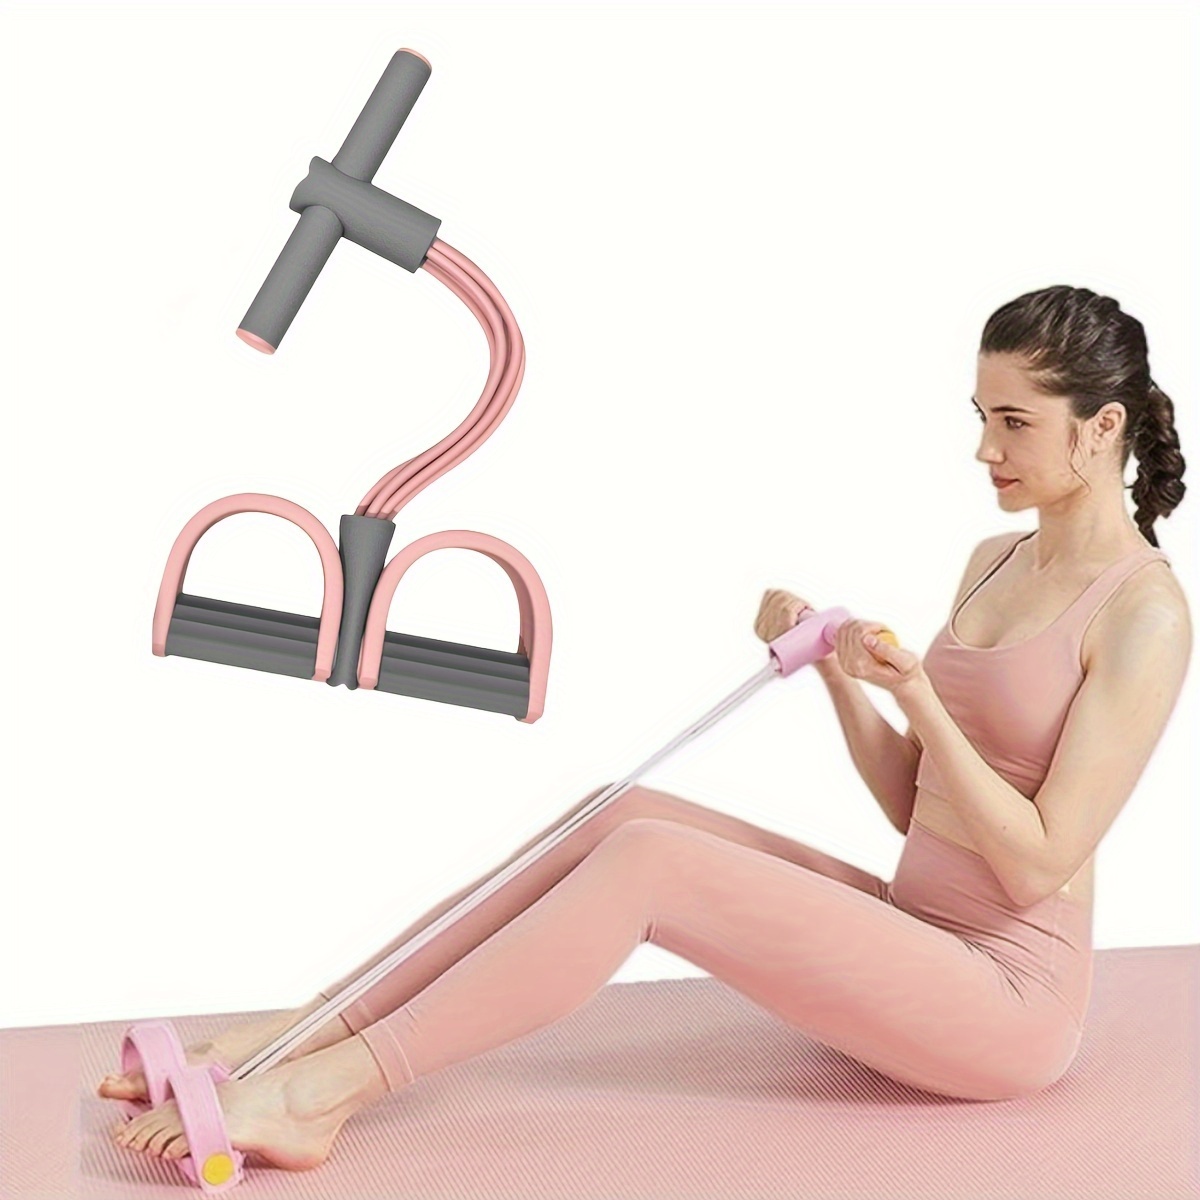 

6-tube Sit-up Aid & Yoga Pedal Puller - Versatile Fitness Tool For Full Body Strengthening, Pilates & Home Gym Workouts - Durable Tpe Material